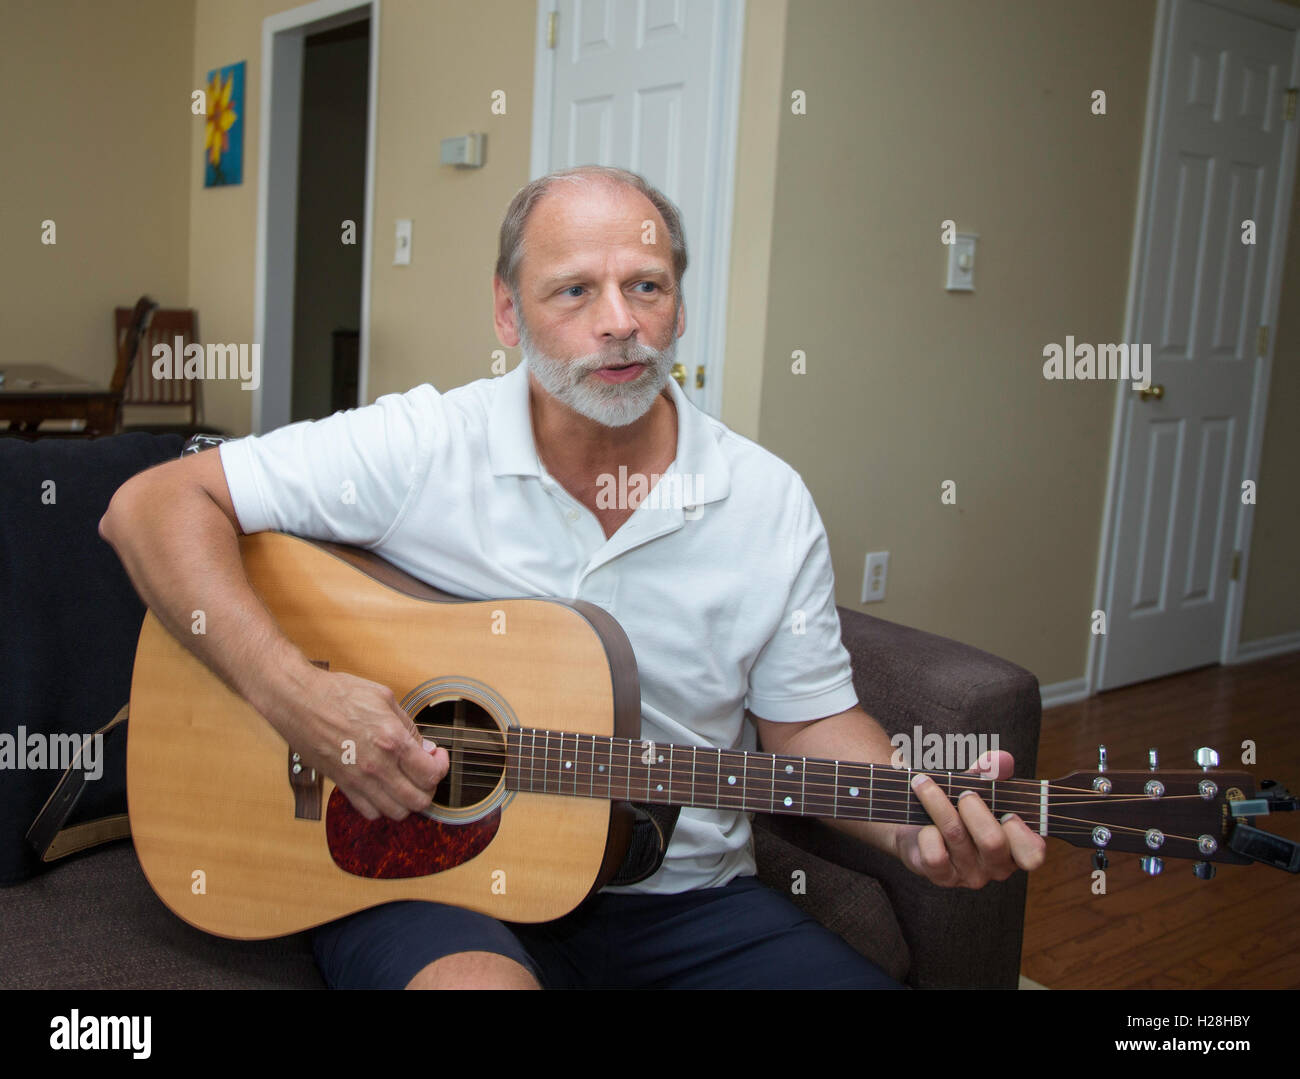 Man playing guitar in his apartment Stock Photo